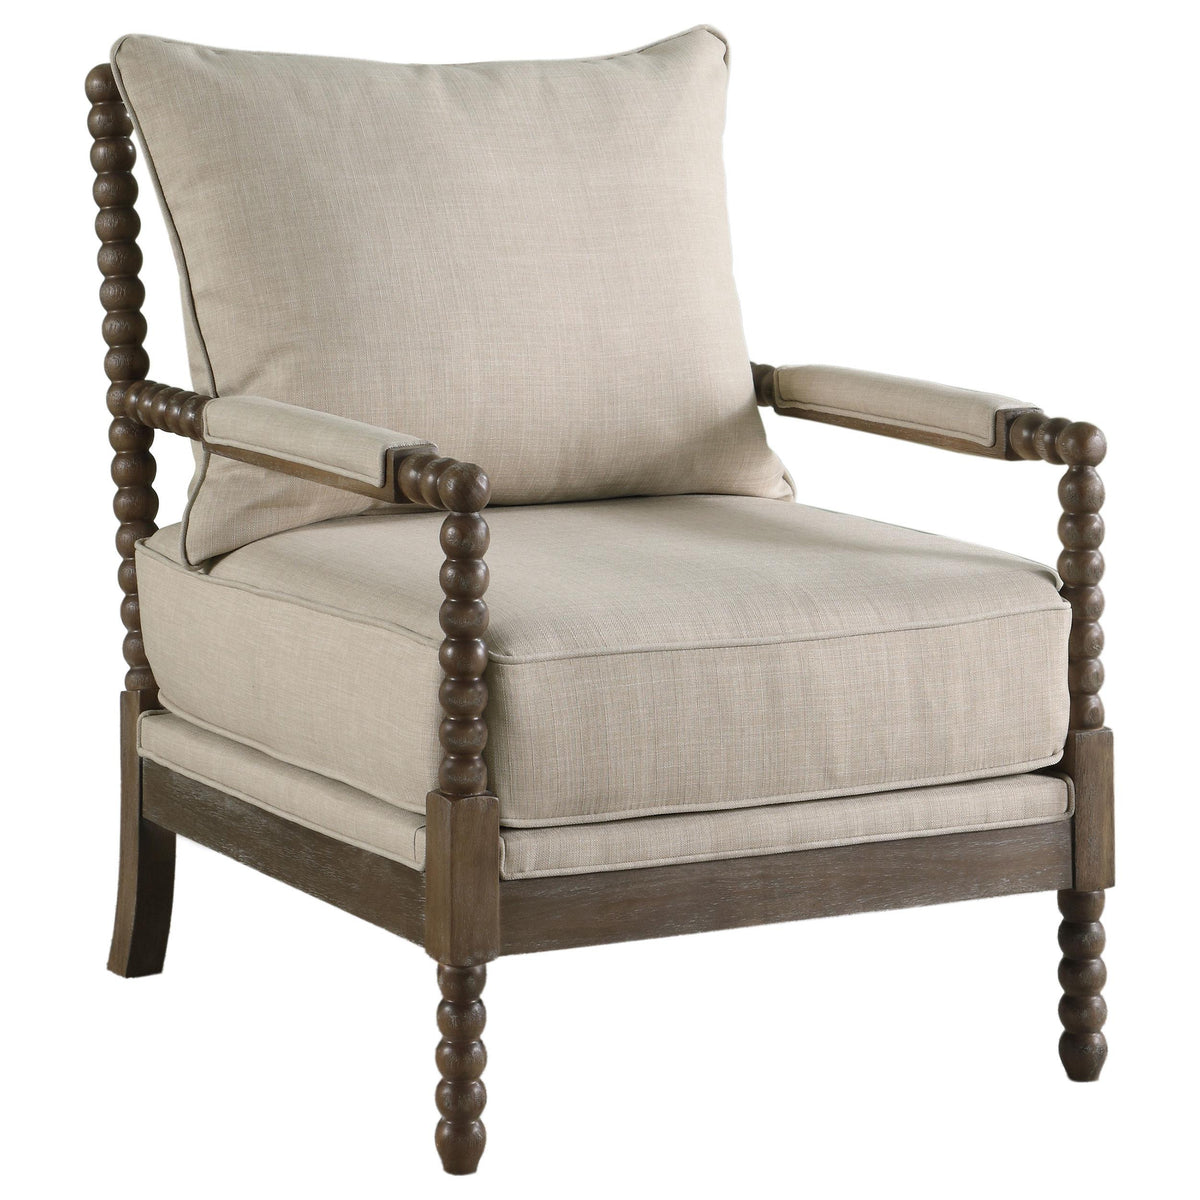 Blanchett Cushion Back Accent Chair Beige and Natural  Half Price Furniture